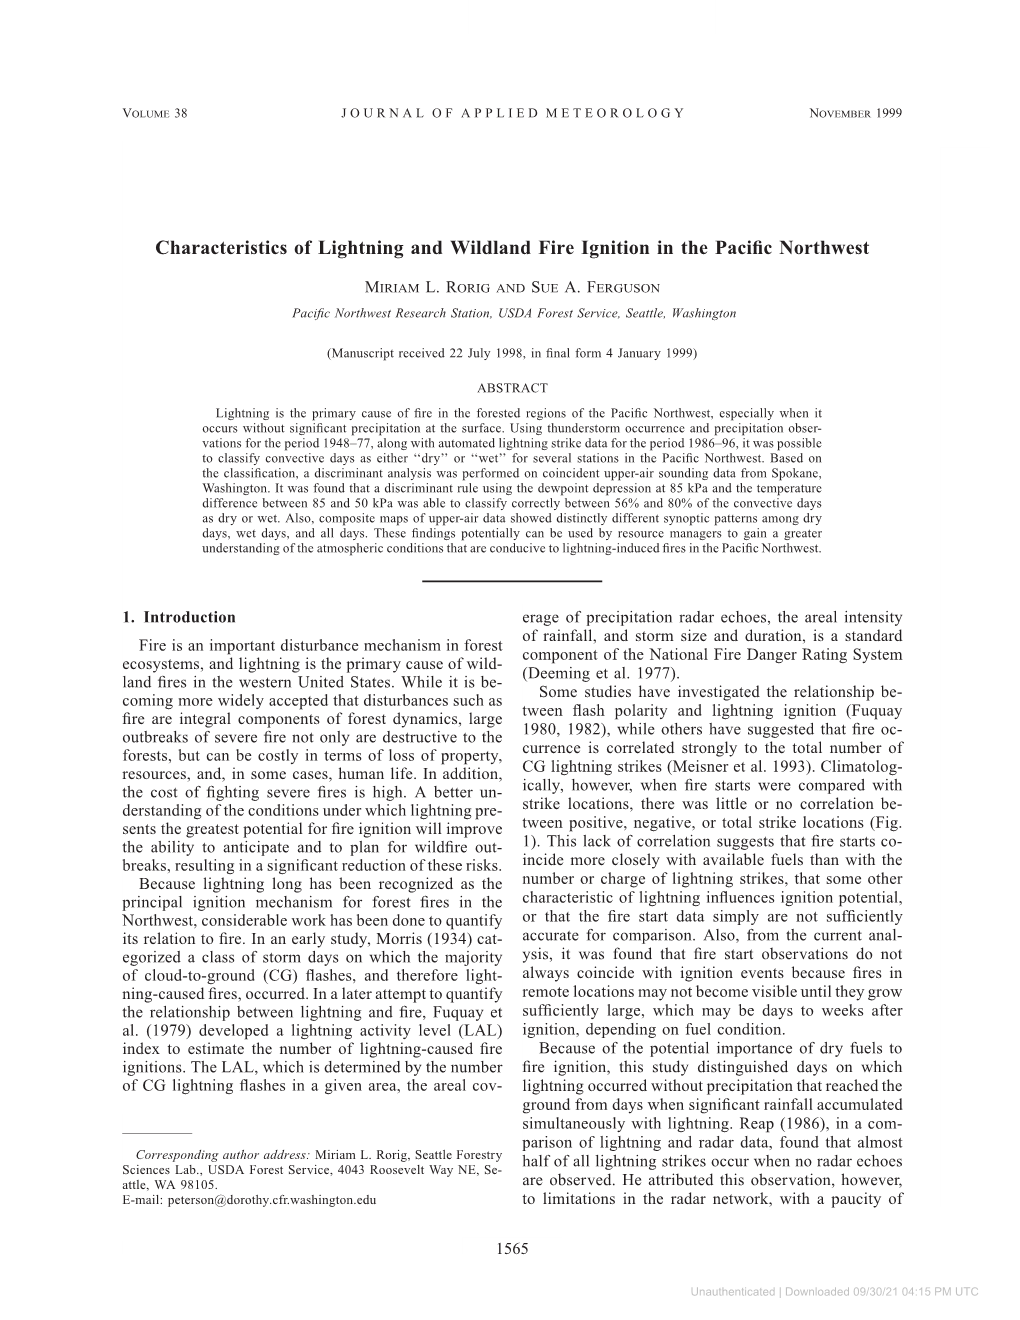 Characteristics of Lightning and Wildland Fire Ignition in the Pacific